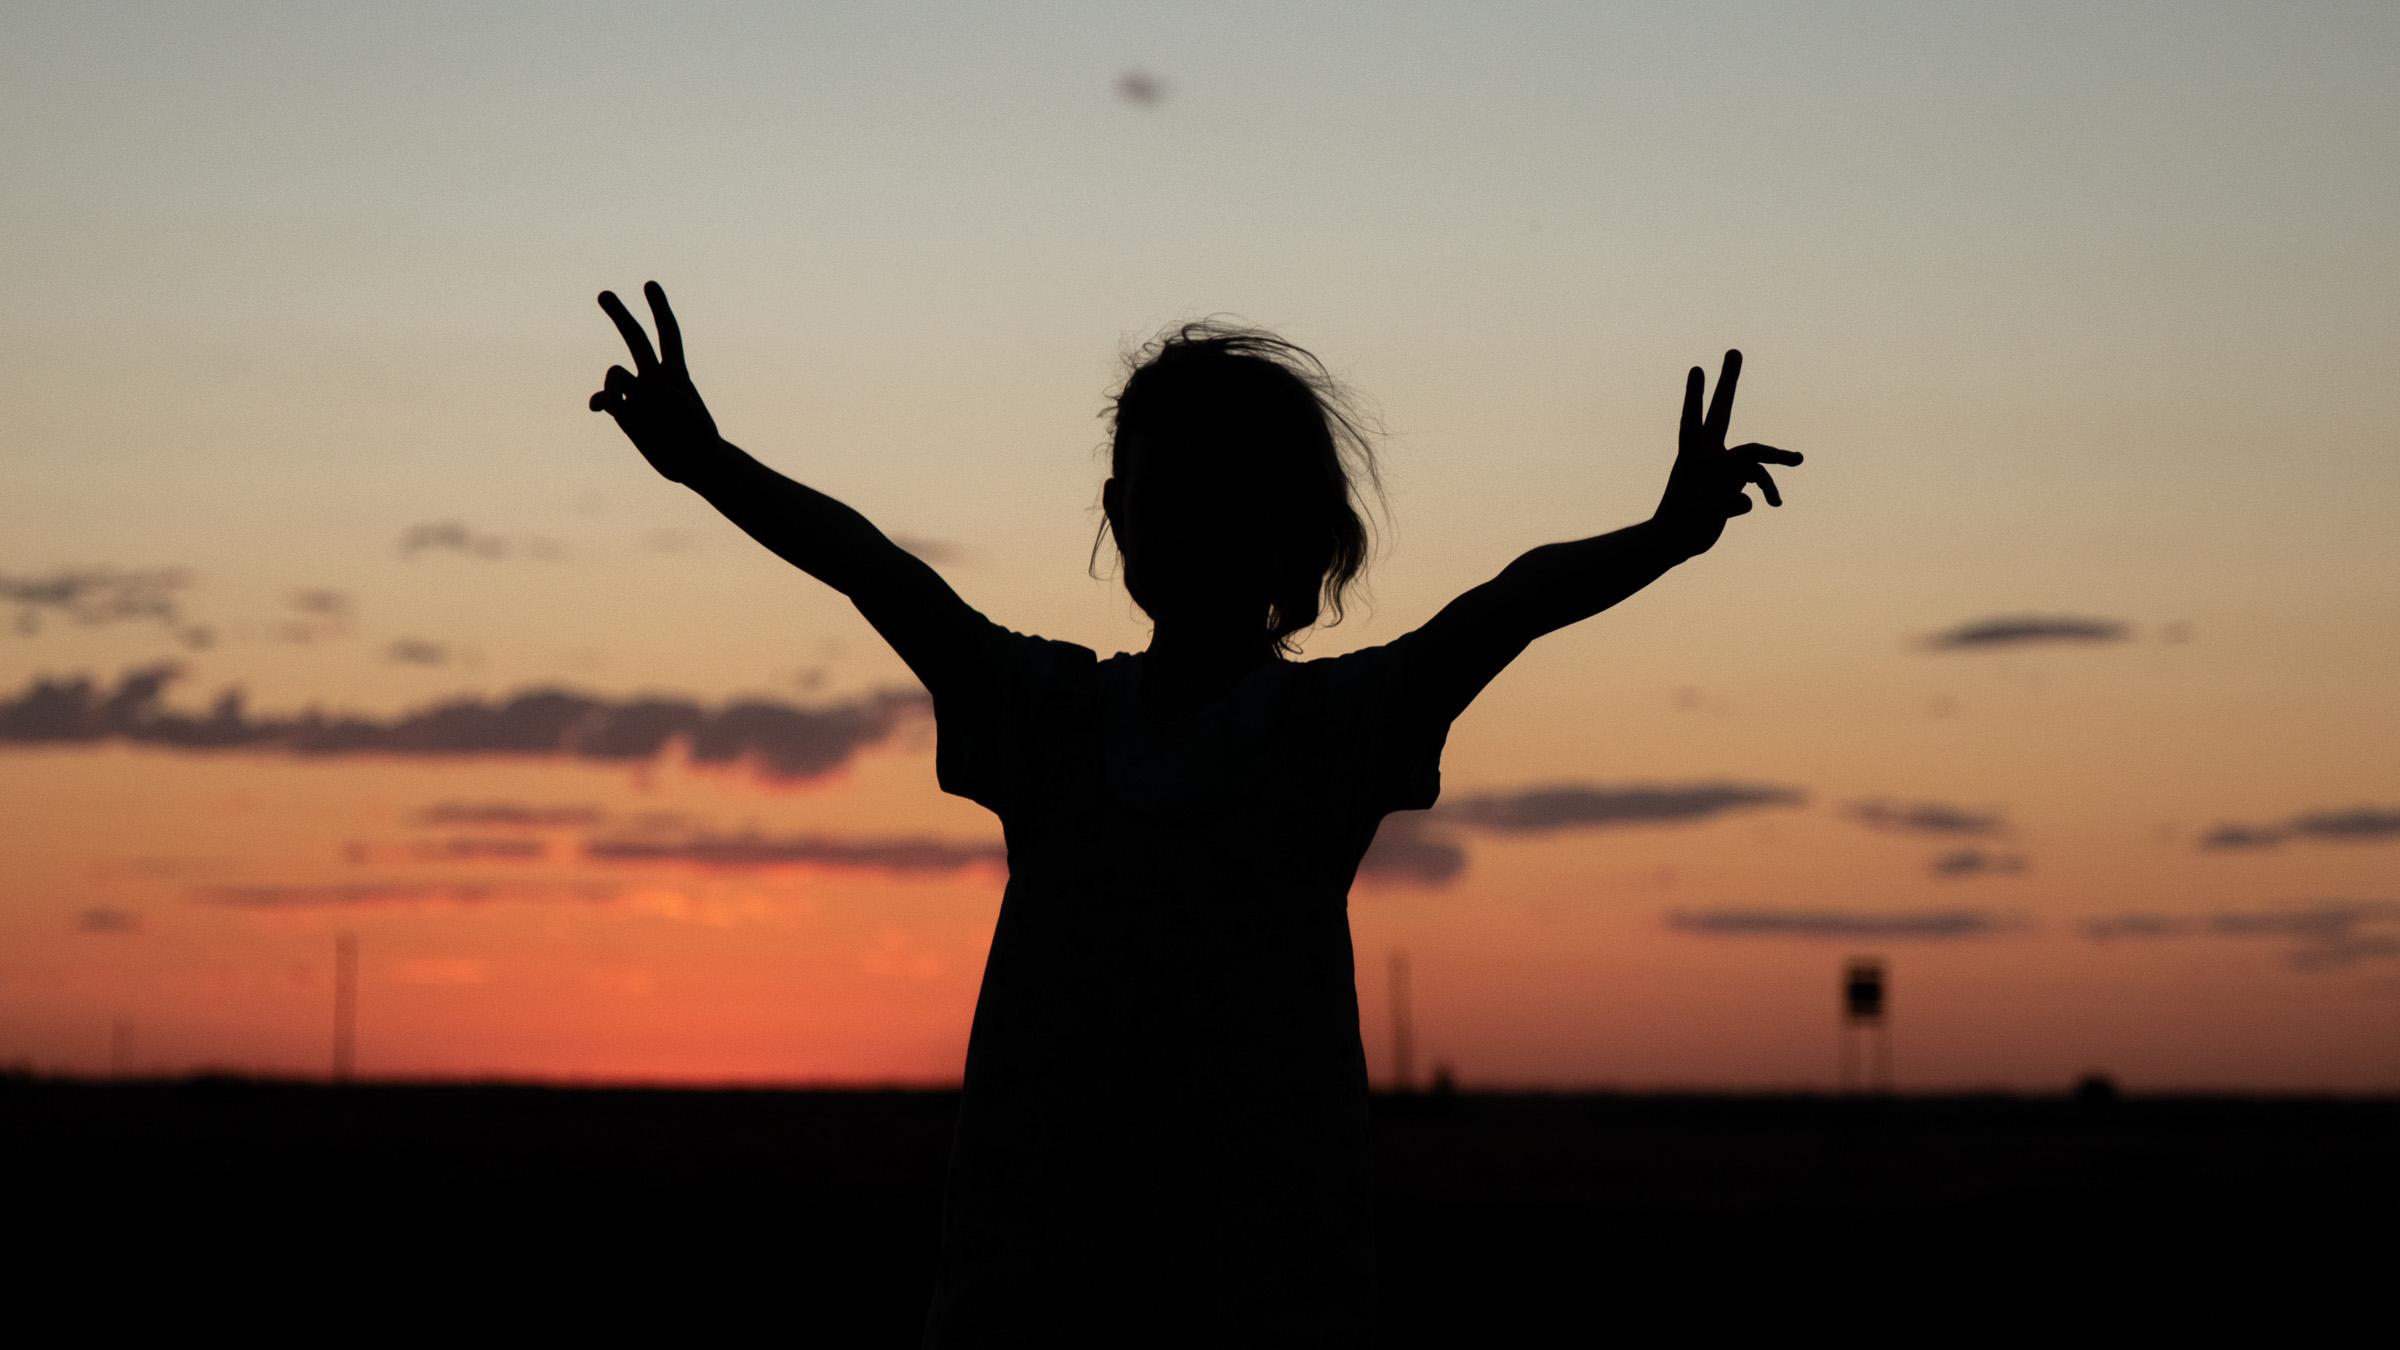 Child with outstretched arms silhouetted against a dark orange sunset